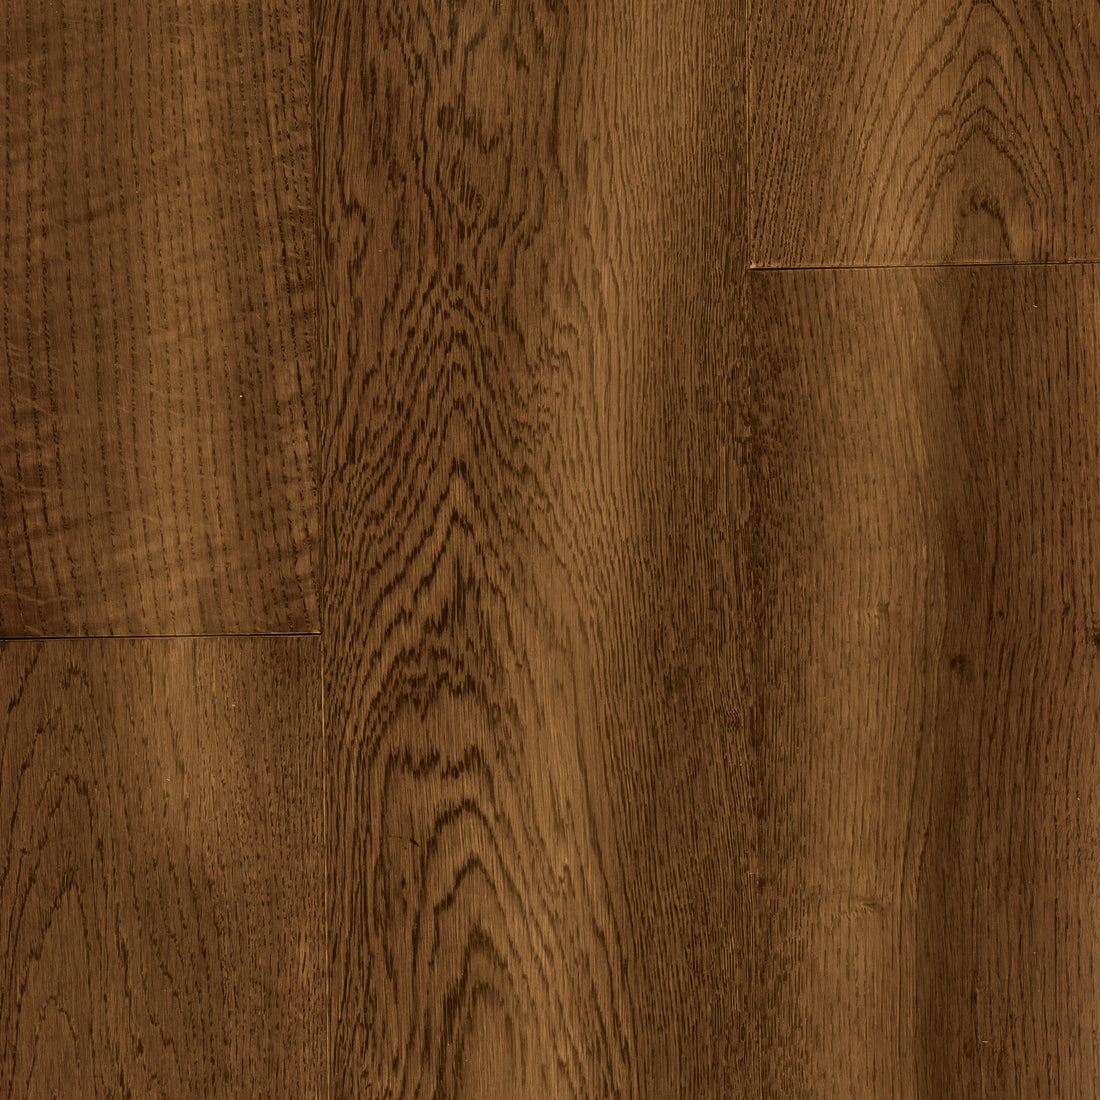 Tuscan Multiply Golden Oak Hand Distressed Lacquered TF21